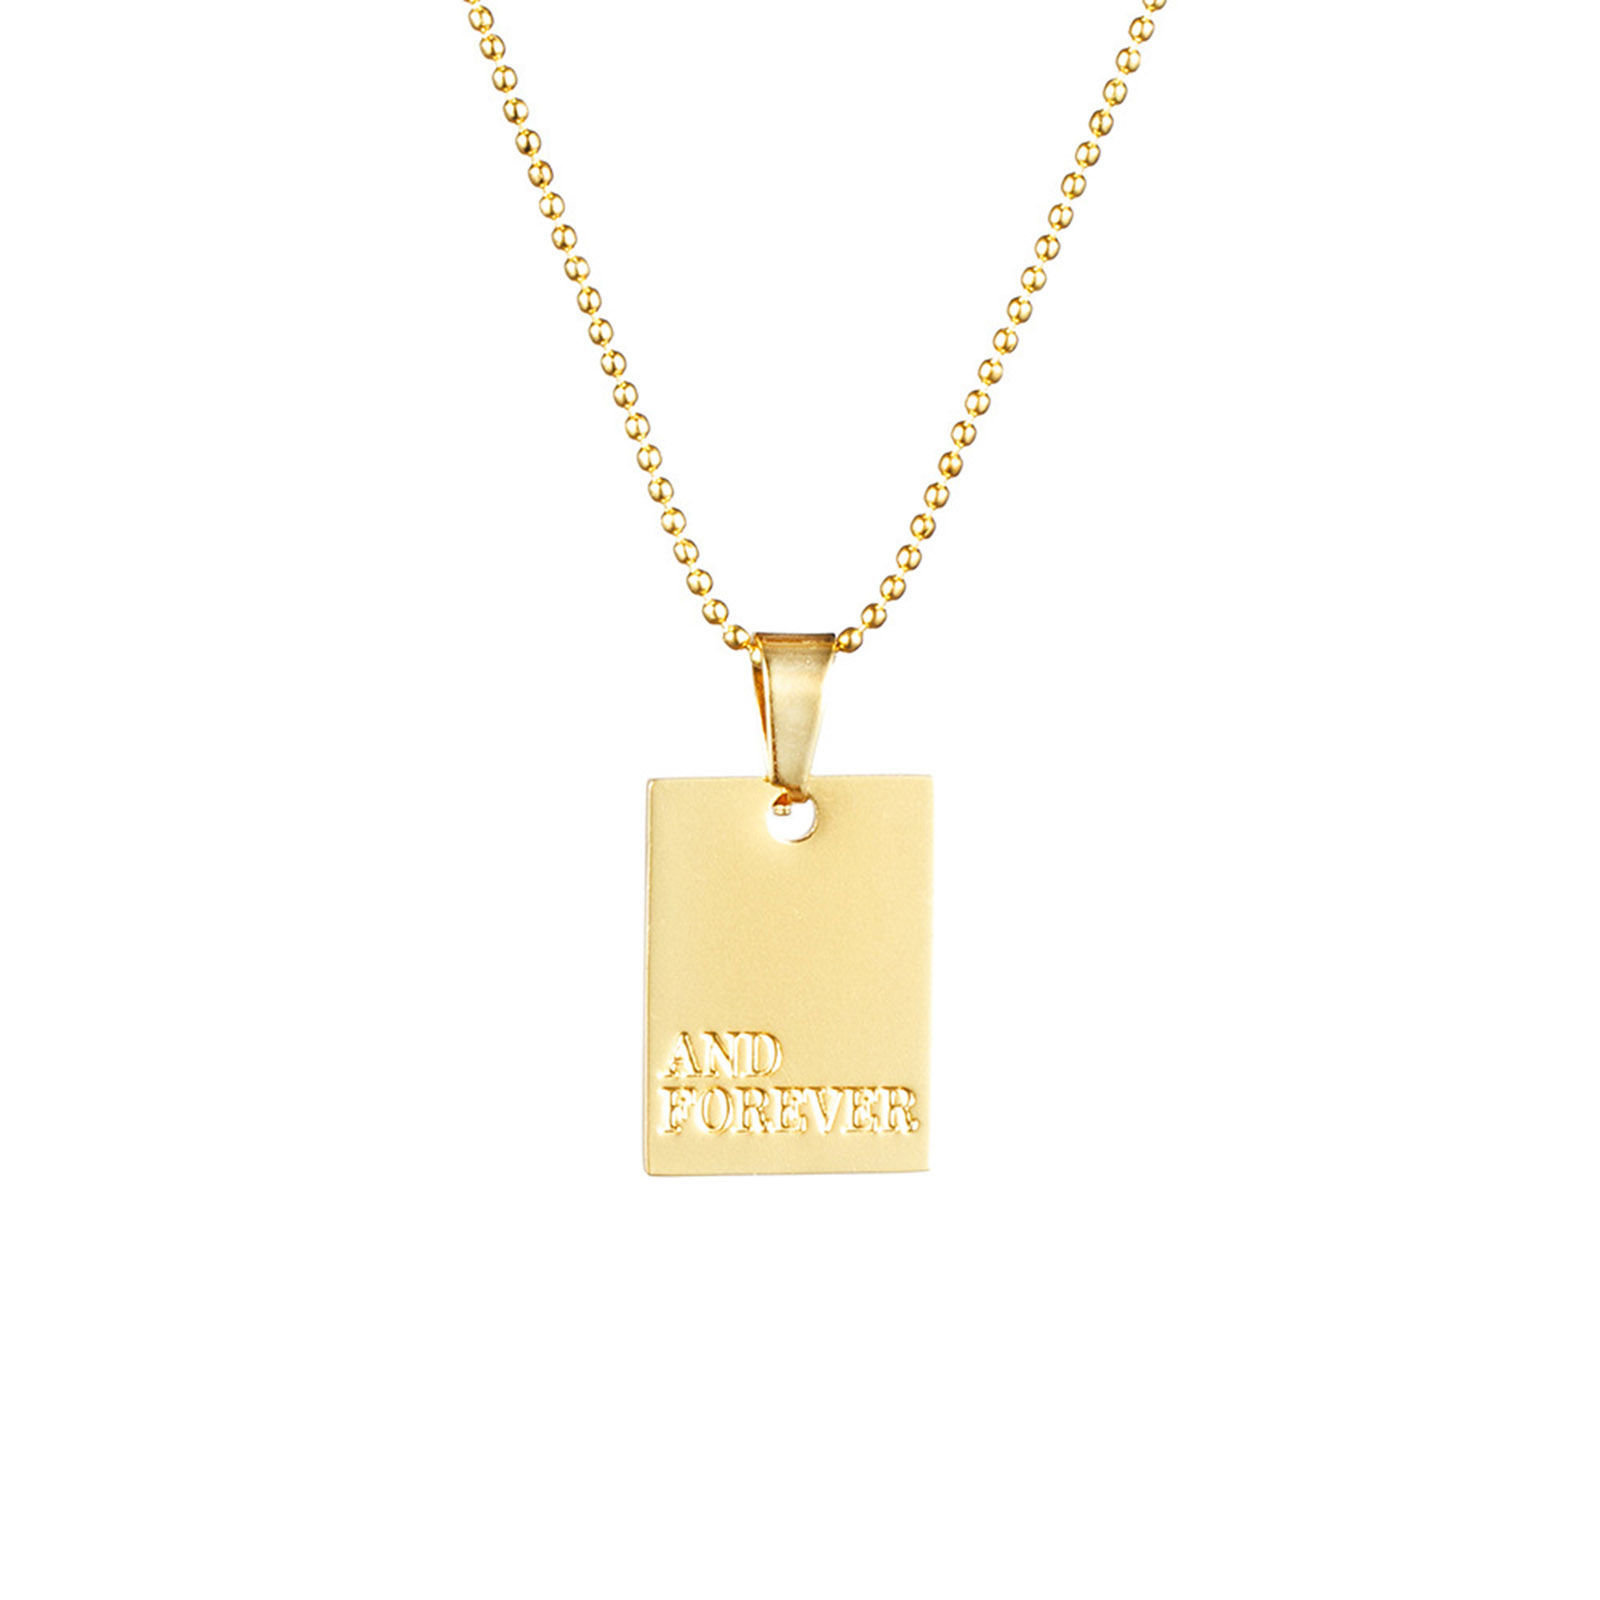 Picture of 304 Stainless Steel Stylish Necklace Gold Plated English Vocabulary Message " And Forever " 39cm(15 3/8") long, 1 Piece